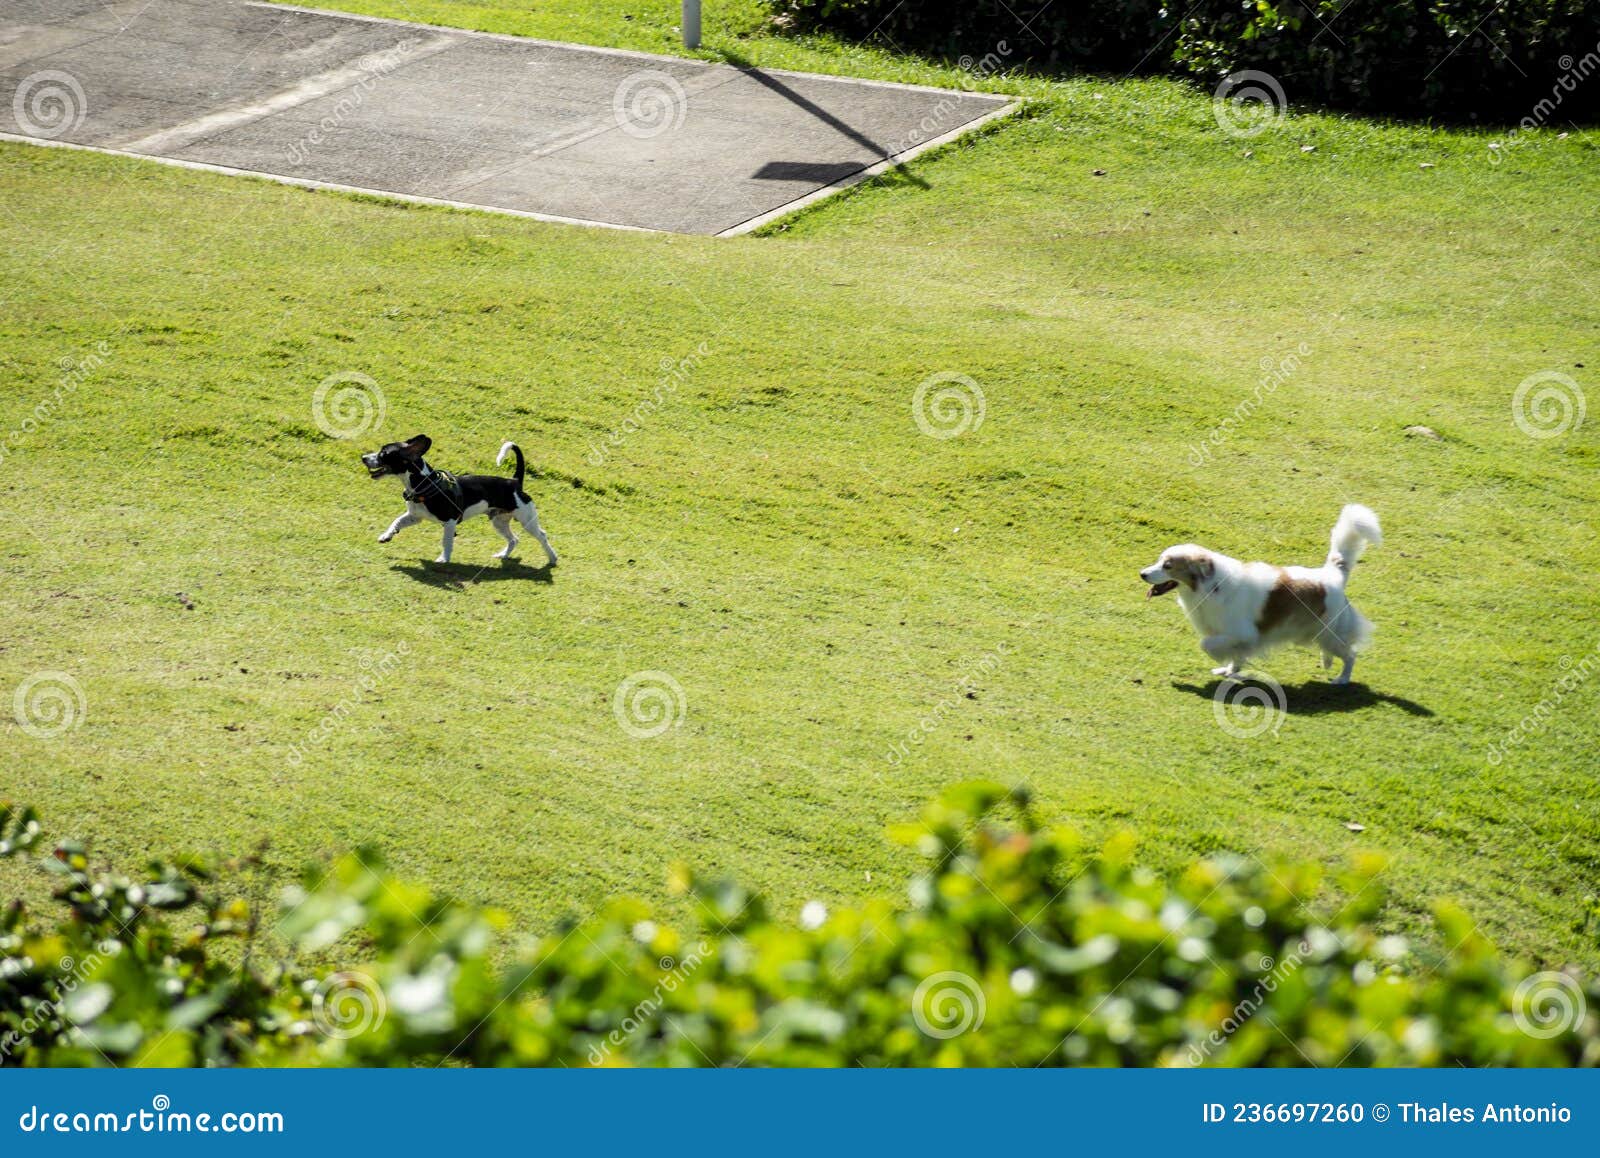 view of a park with dogs running and playing outdoors